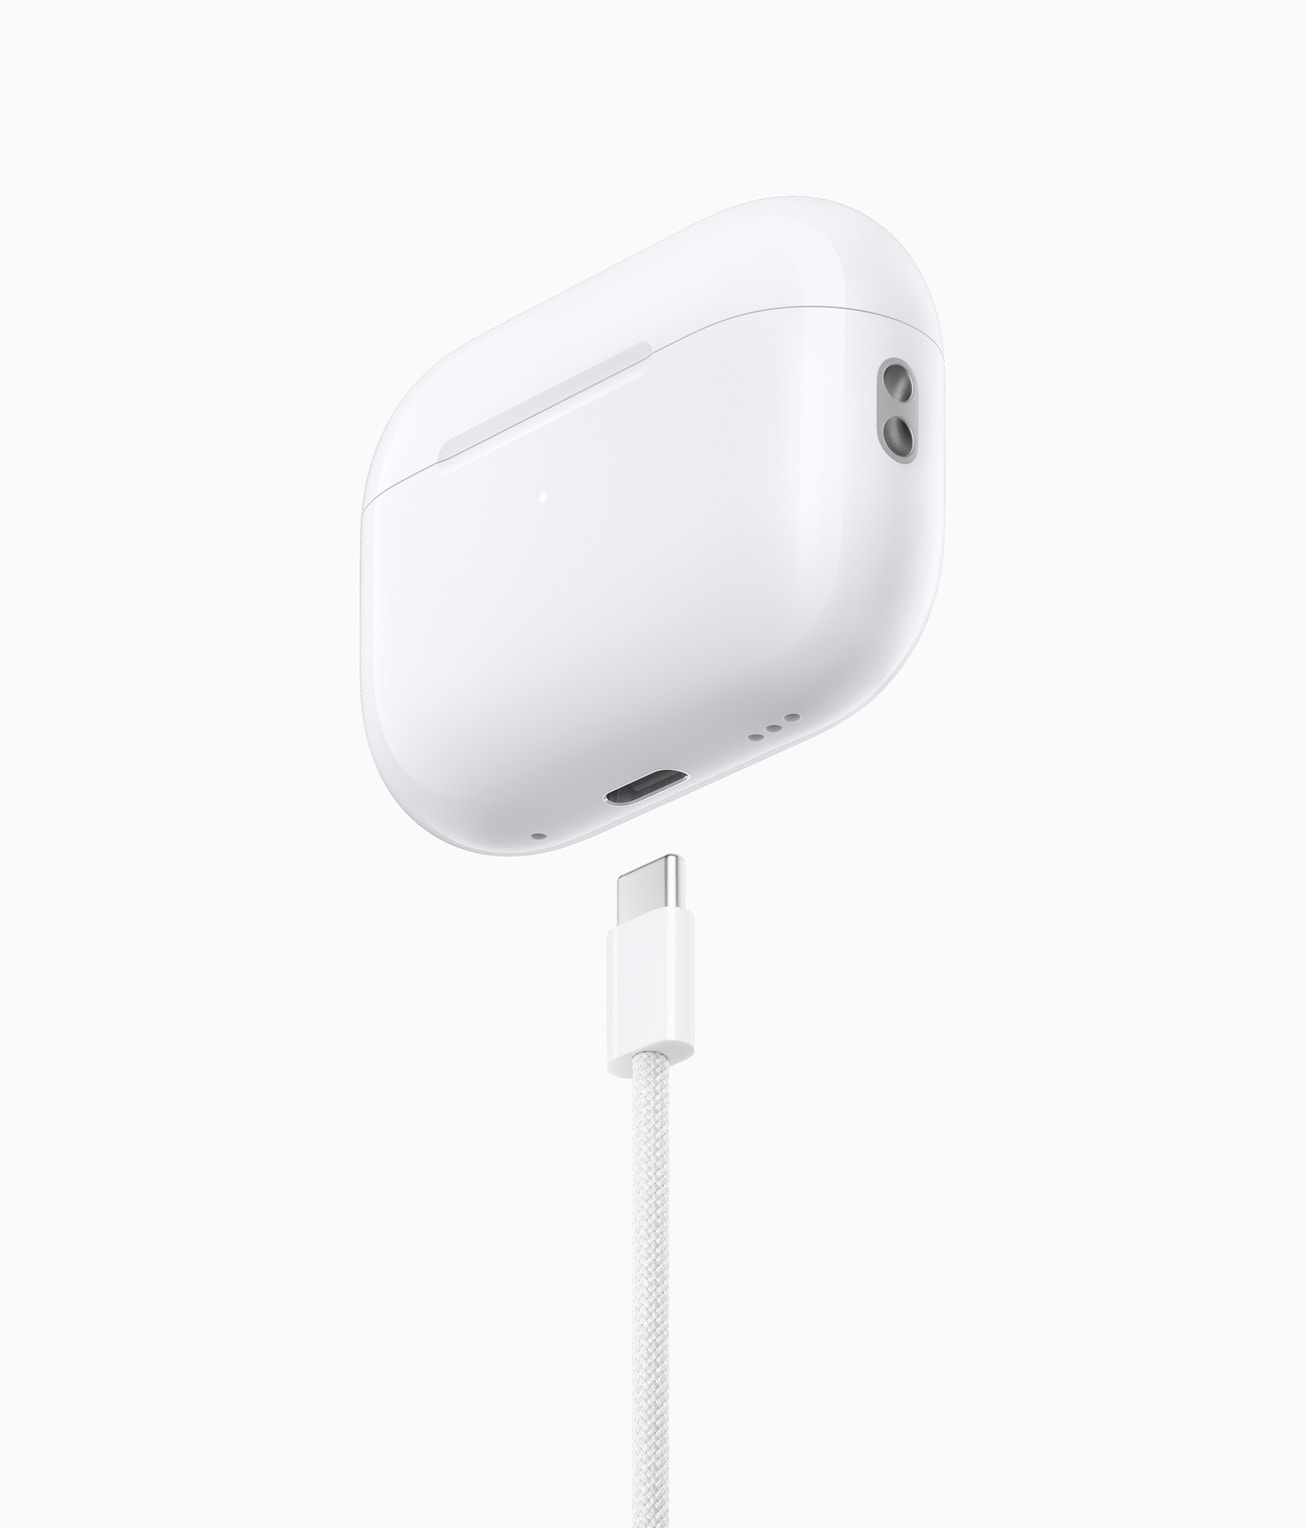 airpods-pro-2-01